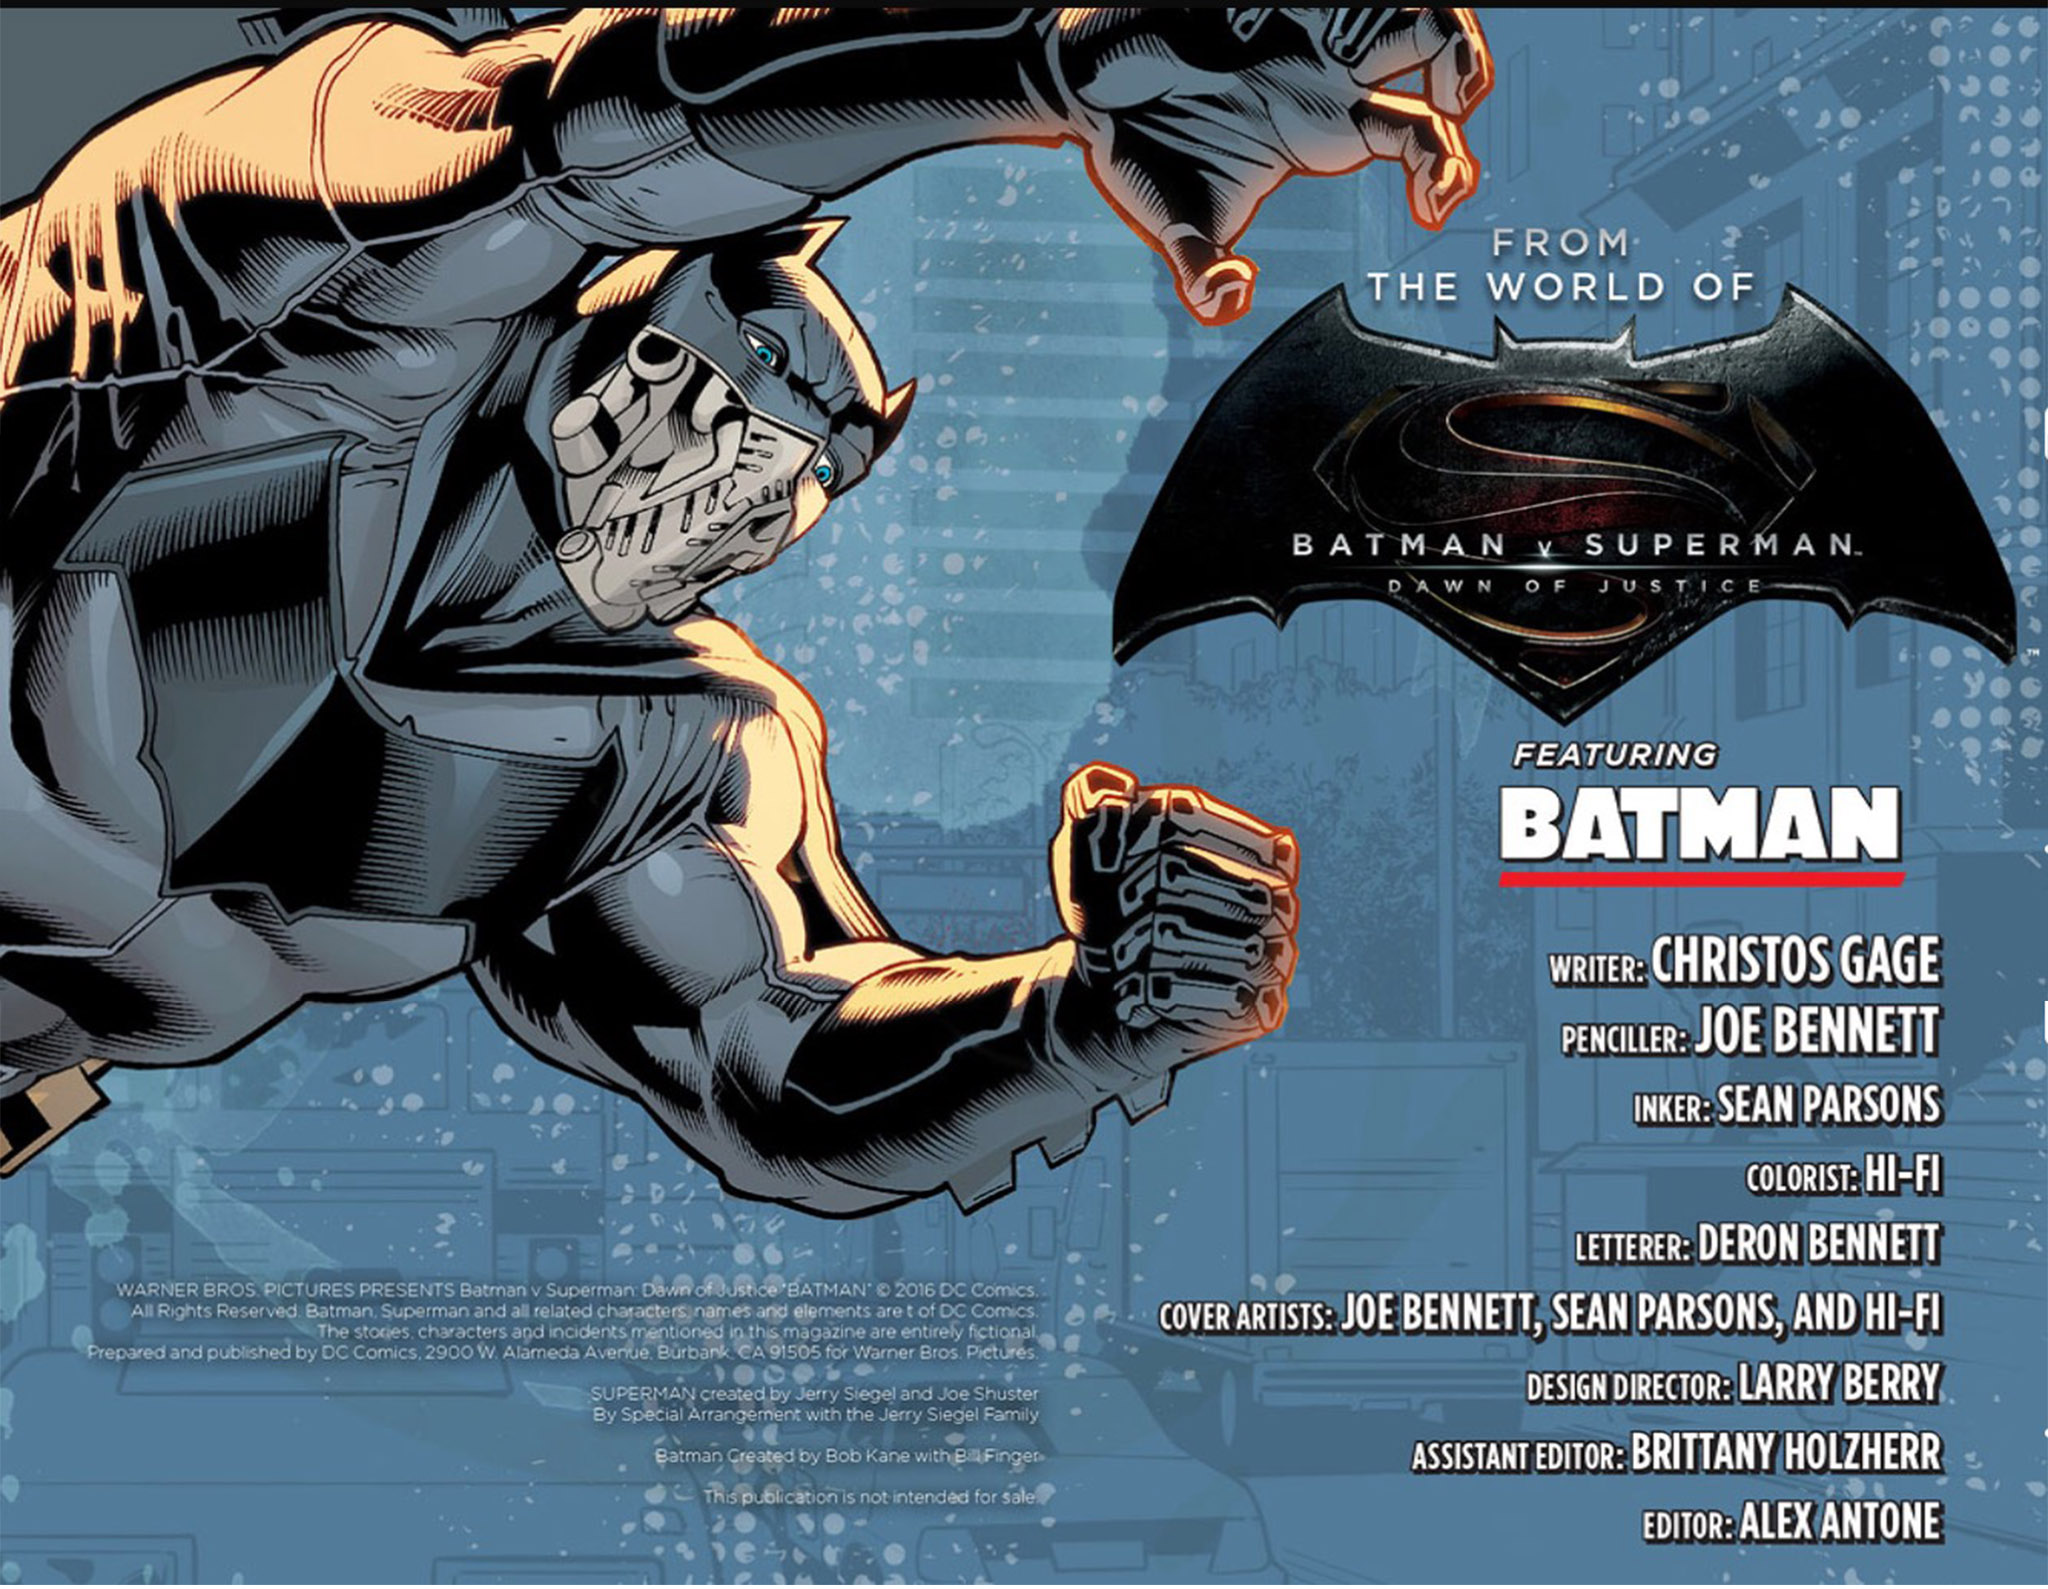 Read online Warner Bros. Pictures Presents Batman v Superman: Dawn of Justice comic -  Issue #1 - 2